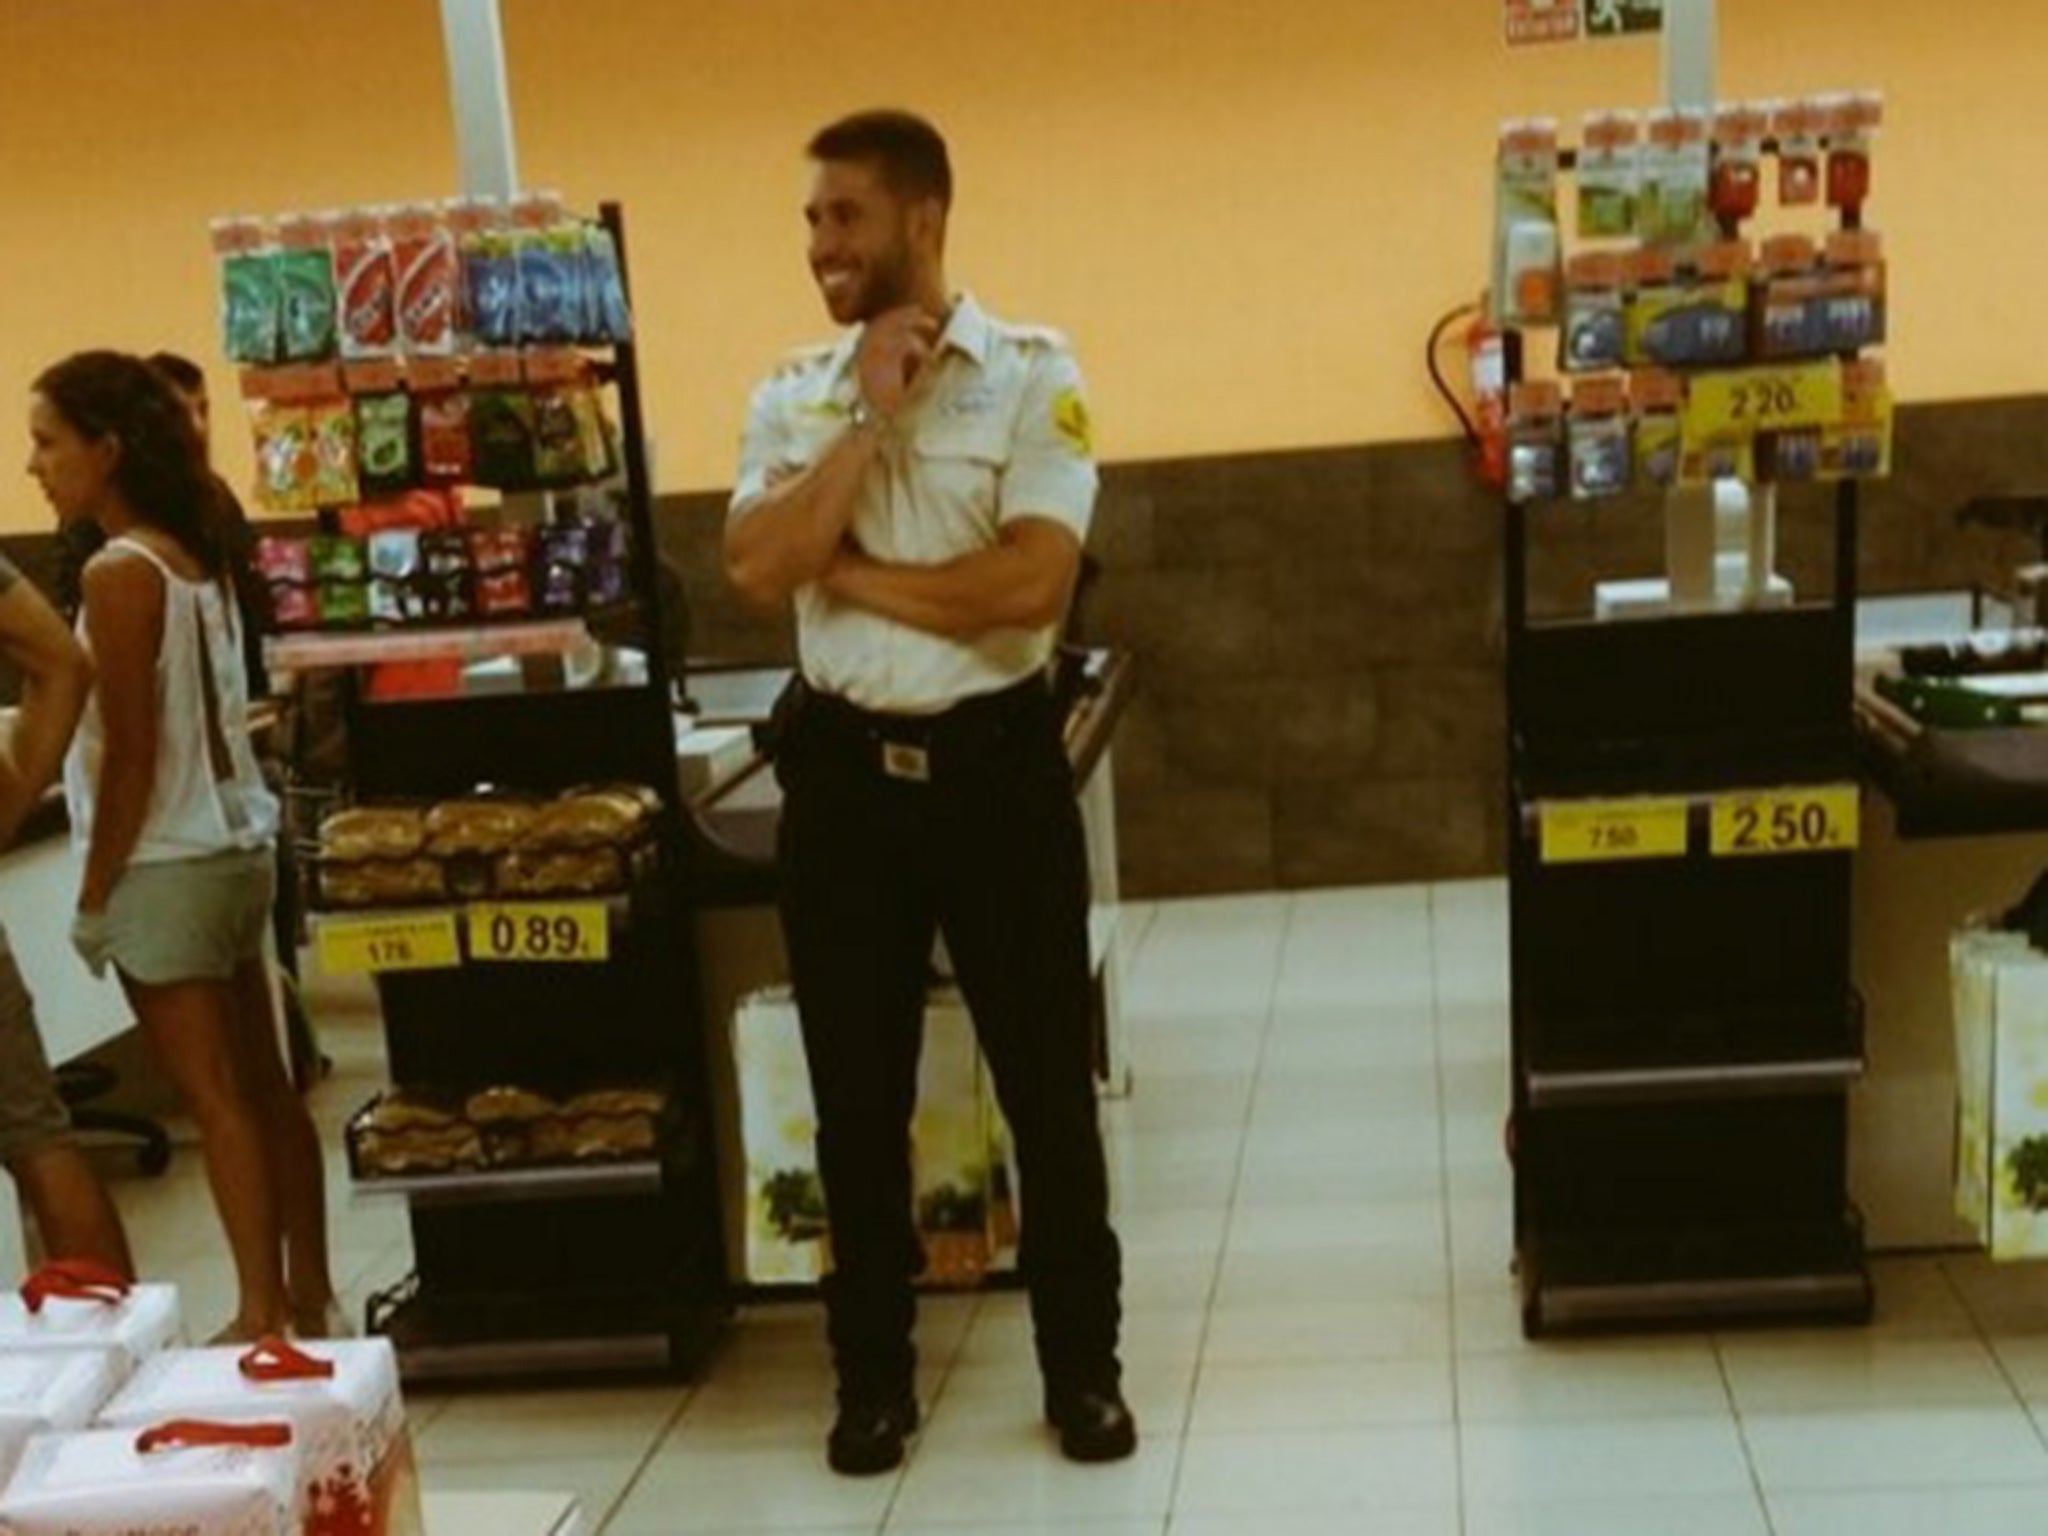 Is that Sergio Ramos working as a security guard?